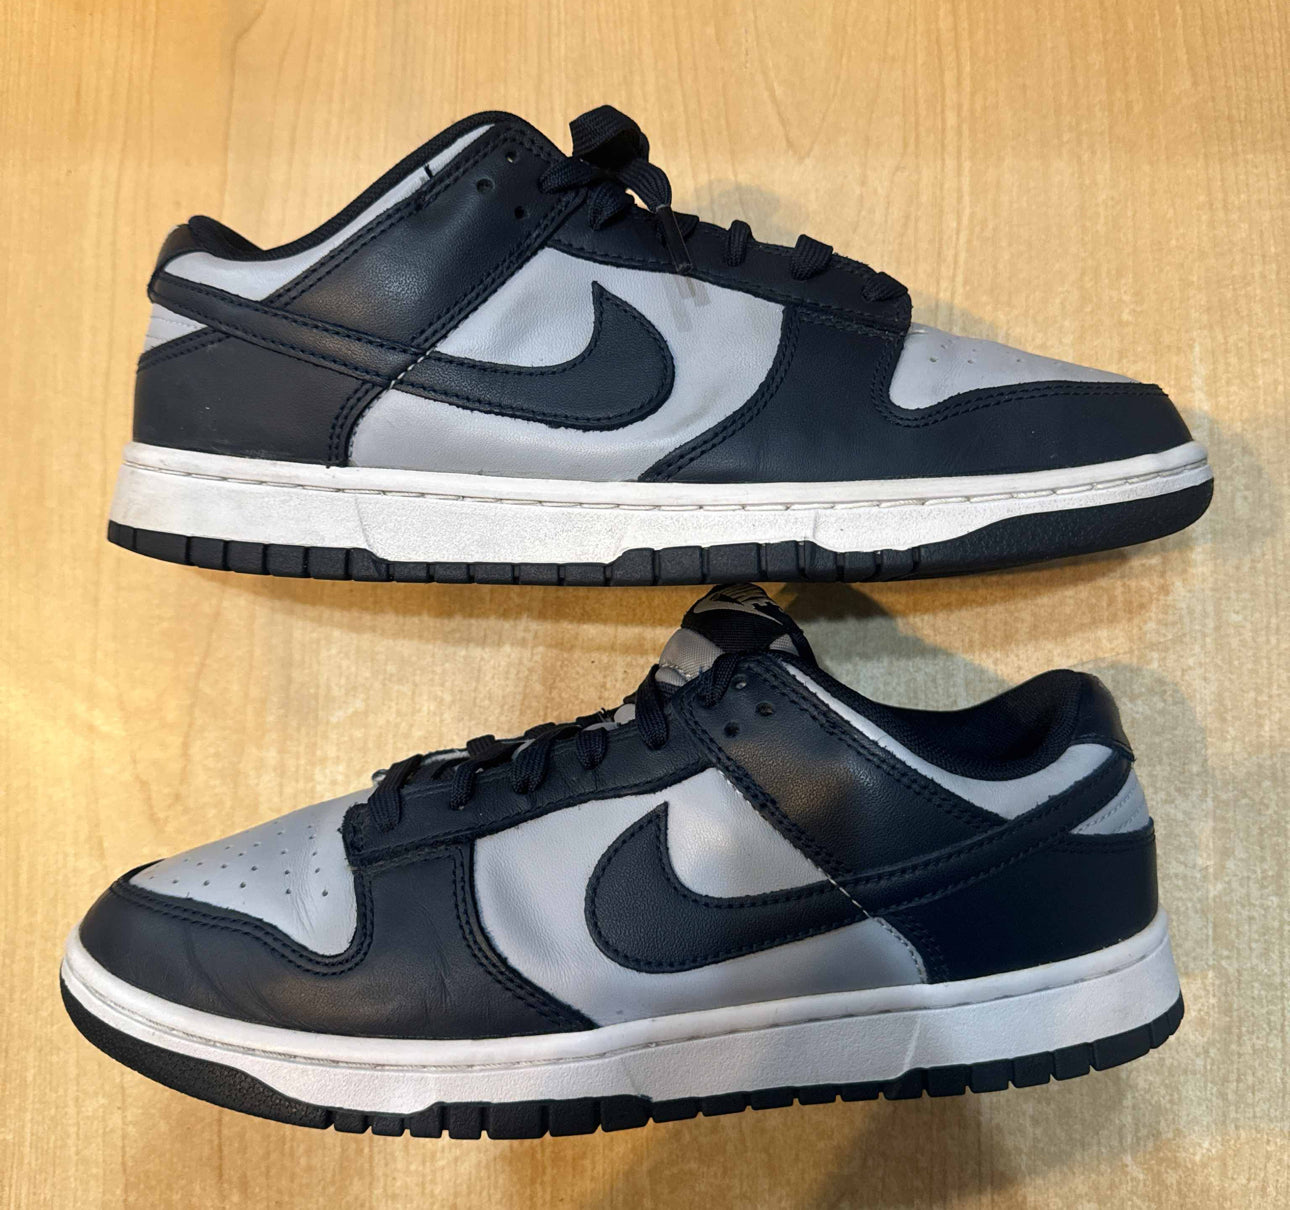 Nike Dunk Low Georgetown Size 10